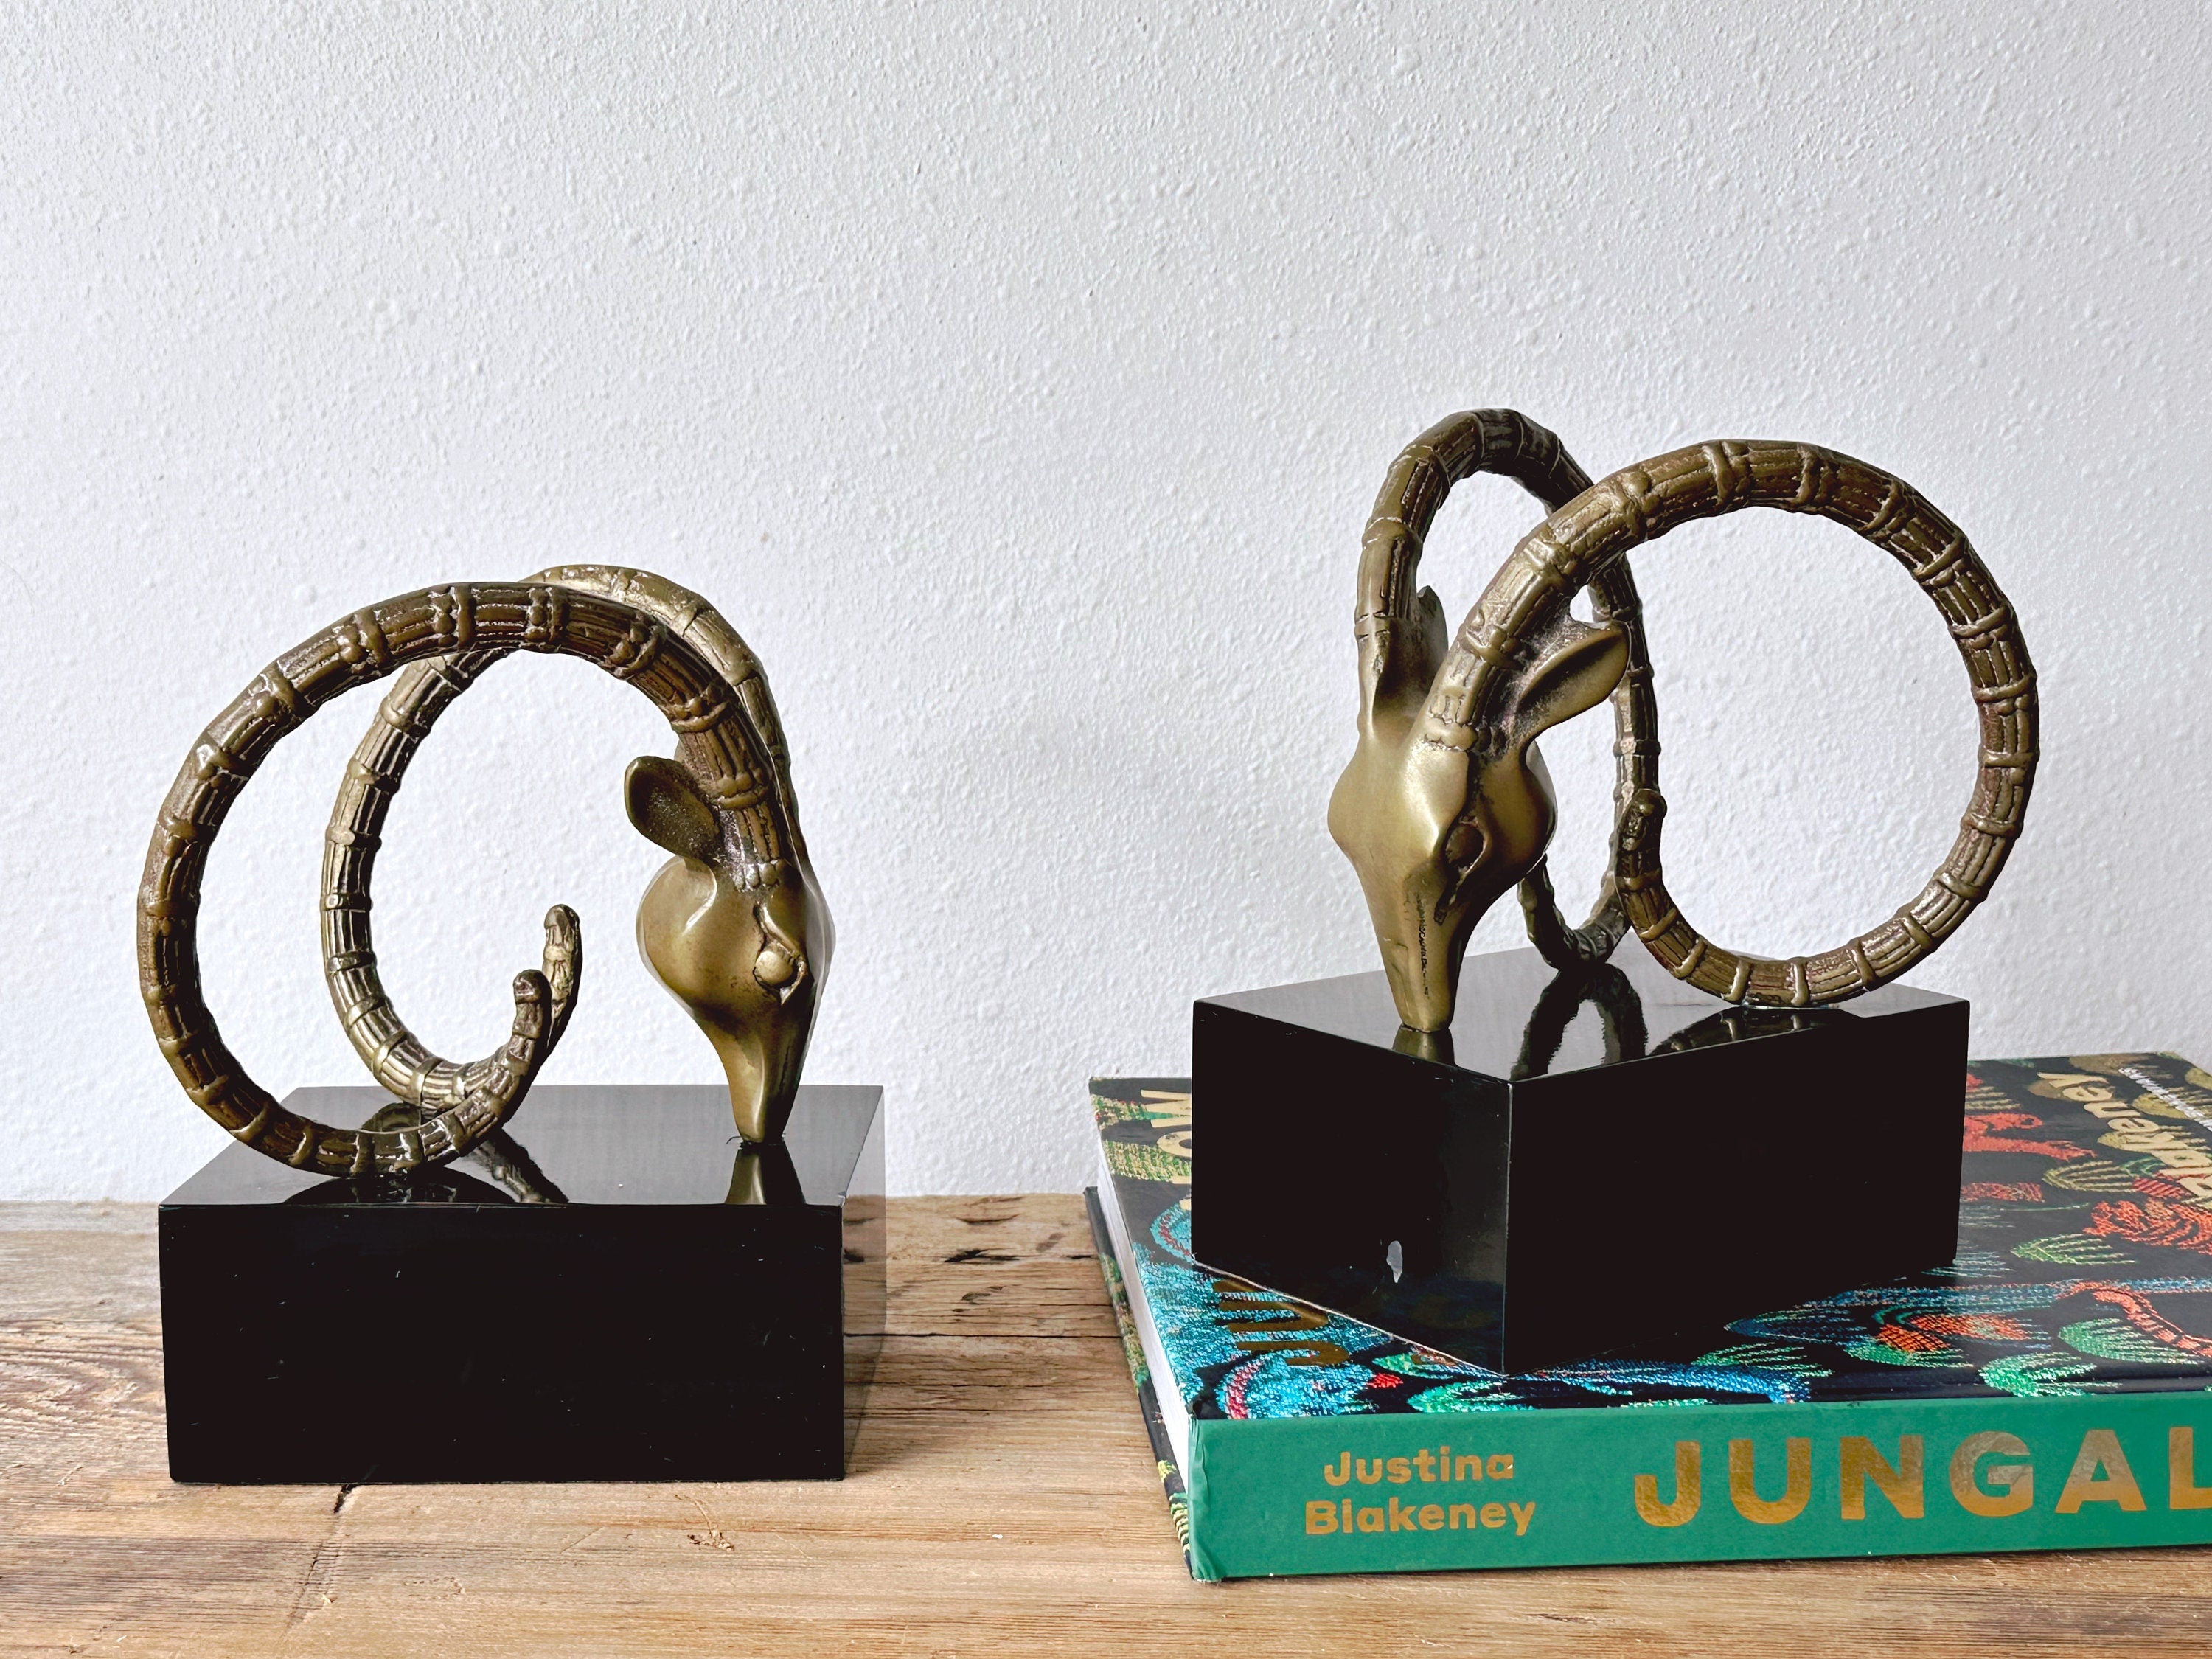 Pair of Vintage 1980s Brass Rams Head Bookends on Black Pedestal | Mid Century Library and Office Decor | Antelope Gazelle Ibex Bookends